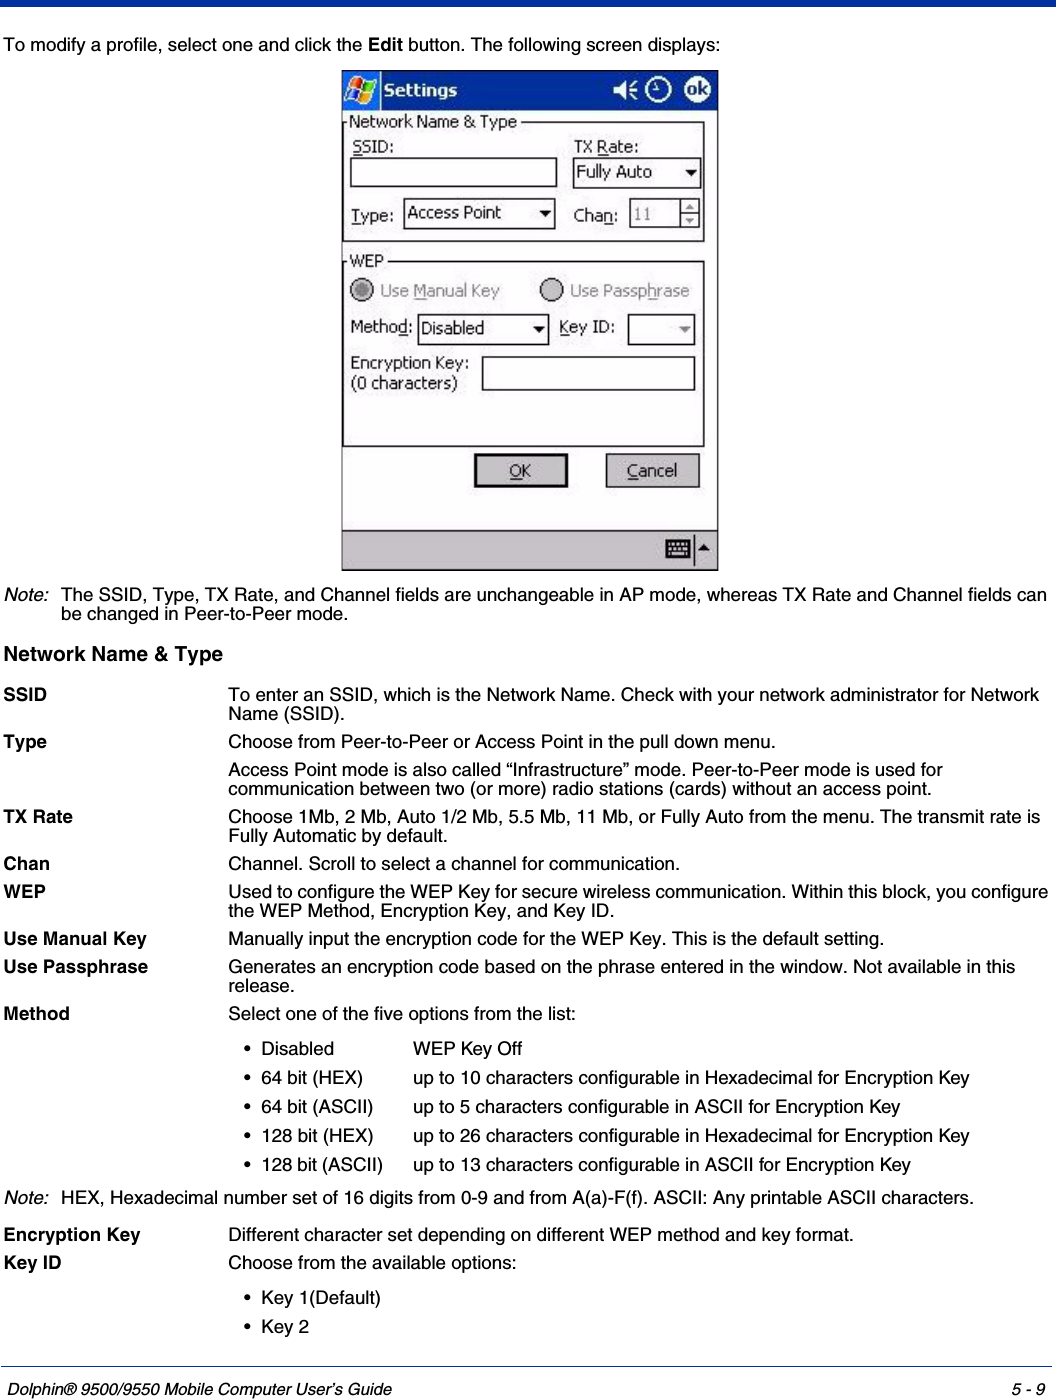 Dolphin® 9500/9550 Mobile Computer User’s Guide 5 - 9To modify a profile, select one and click the Edit button. The following screen displays:Note:The SSID, Type, TX Rate, and Channel fields are unchangeable in AP mode, whereas TX Rate and Channel fields can be changed in Peer-to-Peer mode.Network Name &amp; Type SSID To enter an SSID, which is the Network Name. Check with your network administrator for Network Name (SSID).Type Choose from Peer-to-Peer or Access Point in the pull down menu. Access Point mode is also called “Infrastructure” mode. Peer-to-Peer mode is used for communication between two (or more) radio stations (cards) without an access point. TX Rate Choose 1Mb, 2 Mb, Auto 1/2 Mb, 5.5 Mb, 11 Mb, or Fully Auto from the menu. The transmit rate is Fully Automatic by default. Chan Channel. Scroll to select a channel for communication. WEP  Used to configure the WEP Key for secure wireless communication. Within this block, you configure the WEP Method, Encryption Key, and Key ID. Use Manual Key Manually input the encryption code for the WEP Key. This is the default setting.Use Passphrase Generates an encryption code based on the phrase entered in the window. Not available in this release.Method Select one of the five options from the list:Note:HEX, Hexadecimal number set of 16 digits from 0-9 and from A(a)-F(f). ASCII: Any printable ASCII characters.Encryption Key Different character set depending on different WEP method and key format.Key ID Choose from the available options: • Disabled WEP Key Off• 64 bit (HEX)  up to 10 characters configurable in Hexadecimal for Encryption Key• 64 bit (ASCII)  up to 5 characters configurable in ASCII for Encryption Key• 128 bit (HEX)  up to 26 characters configurable in Hexadecimal for Encryption Key• 128 bit (ASCII)  up to 13 characters configurable in ASCII for Encryption Key• Key 1(Default)•Key 2